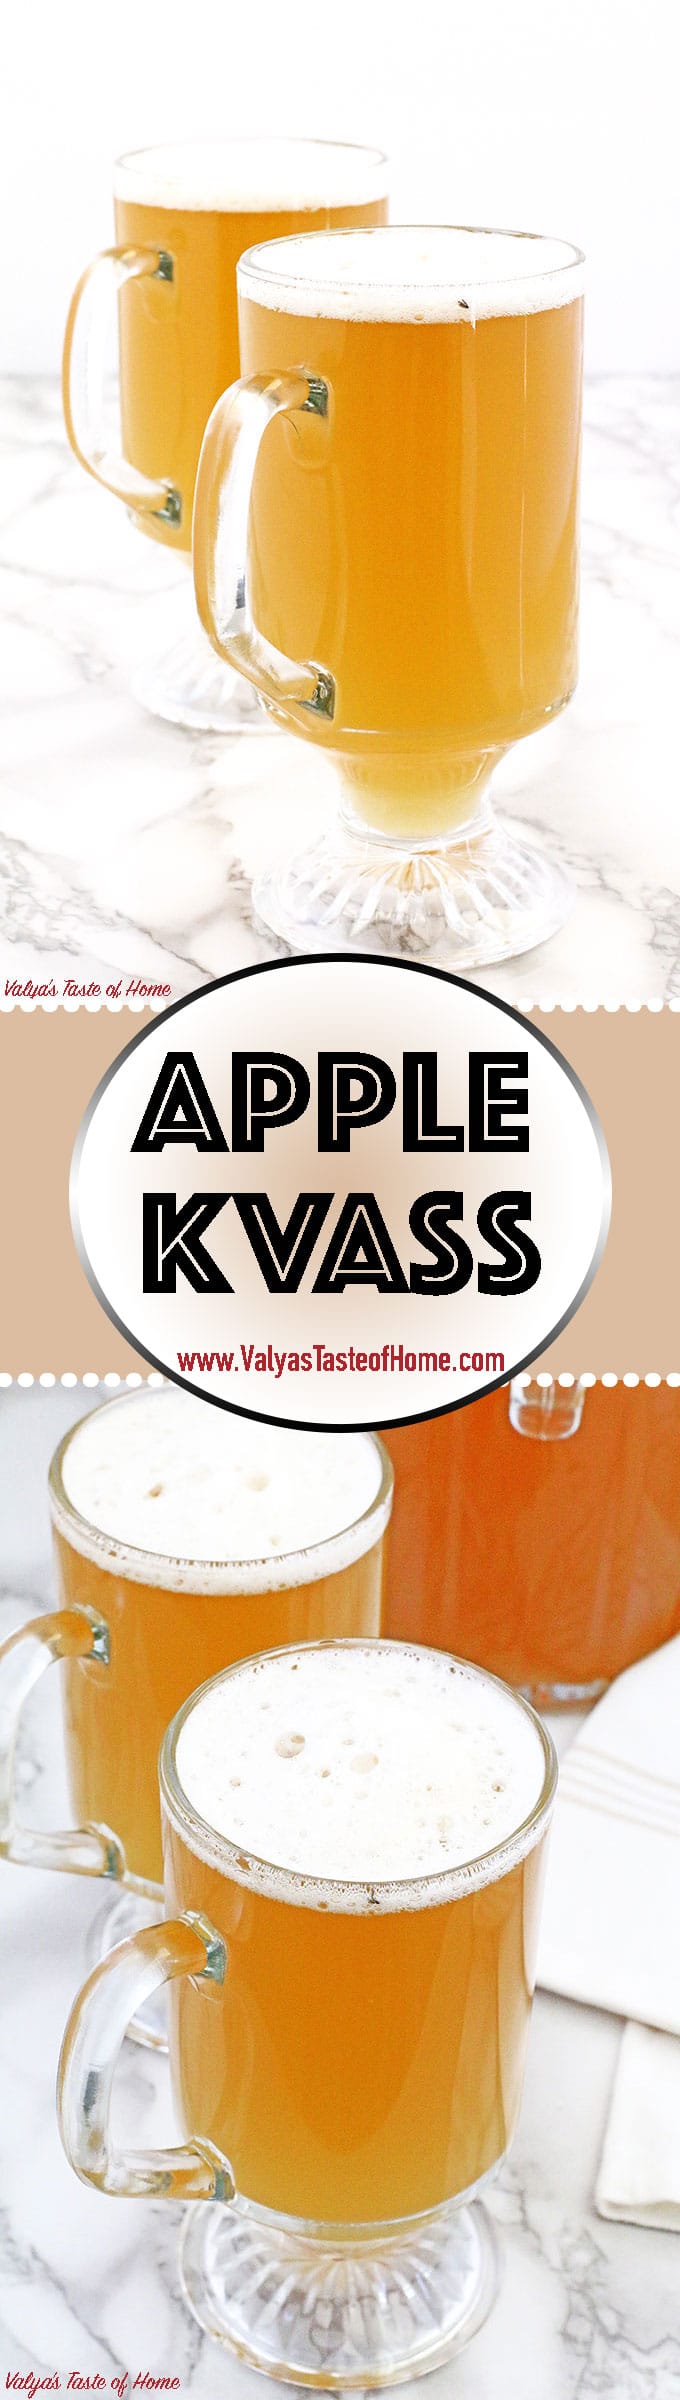 This traditional Ukrainian Apple Kvass - Квас "Яблочный"drink is truly yummylitious! There are many different kvass recipes, including the most popular bread kvass, but this recipe has a delicious, apple flavor that is just delightful and enjoyed by adults and kids alike. Kvass is a perfect thirst-quenching drink, remarkably refreshing, especially during these hot summer days. 